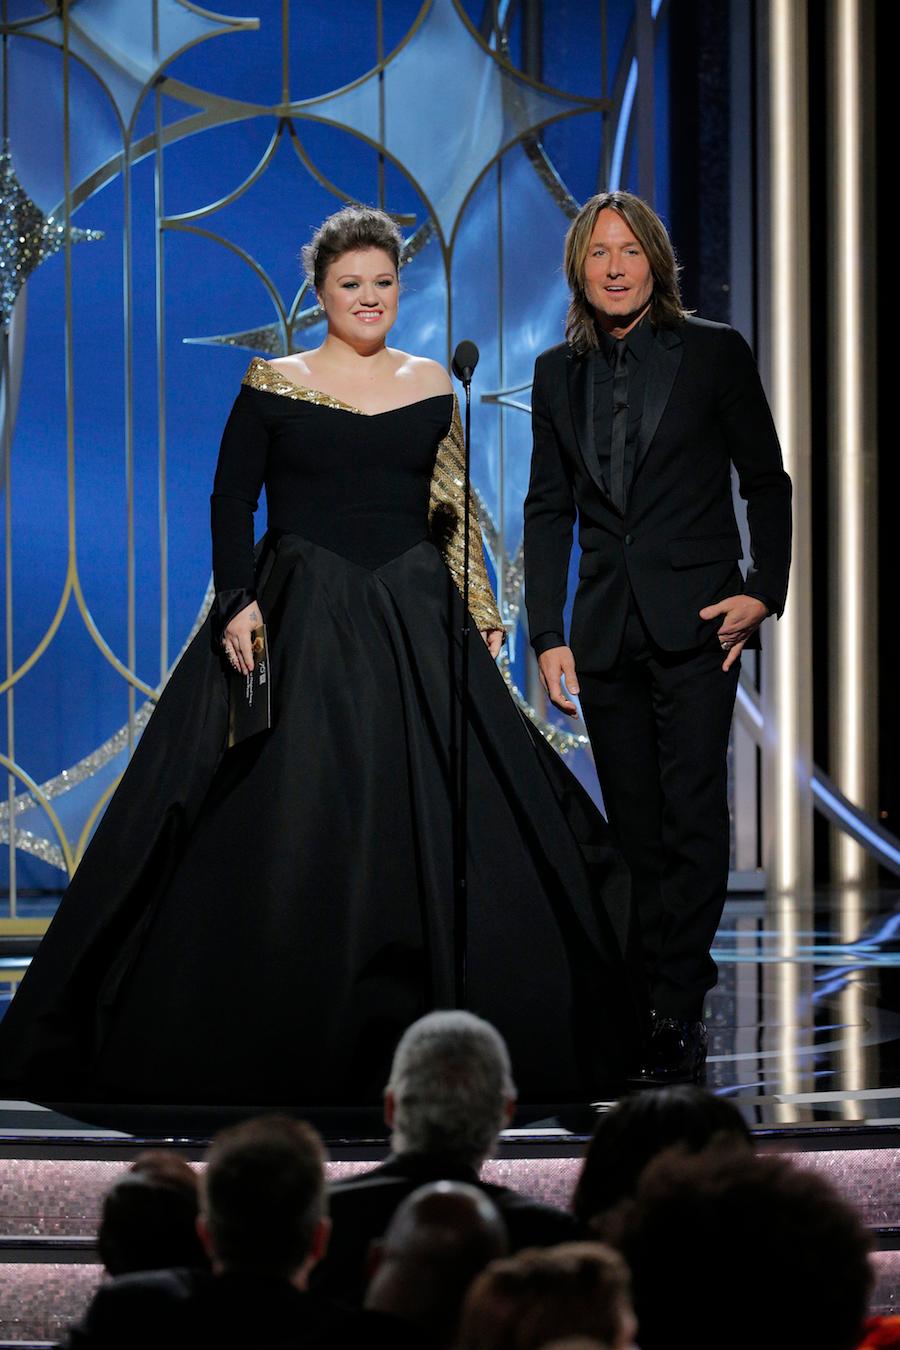 Presenters Kelly Clarkson and Keith Urban speak onstage during the 75th Annual Golden Globe Awards in 2018 in Beverly Hills, California. (©Getty Images | <a href="https://www.gettyimages.com/detail/news-photo/in-this-handout-photo-provided-by-nbcuniversal-presenters-news-photo/902735354?adppopup=true">Paul Drinkwater</a>)